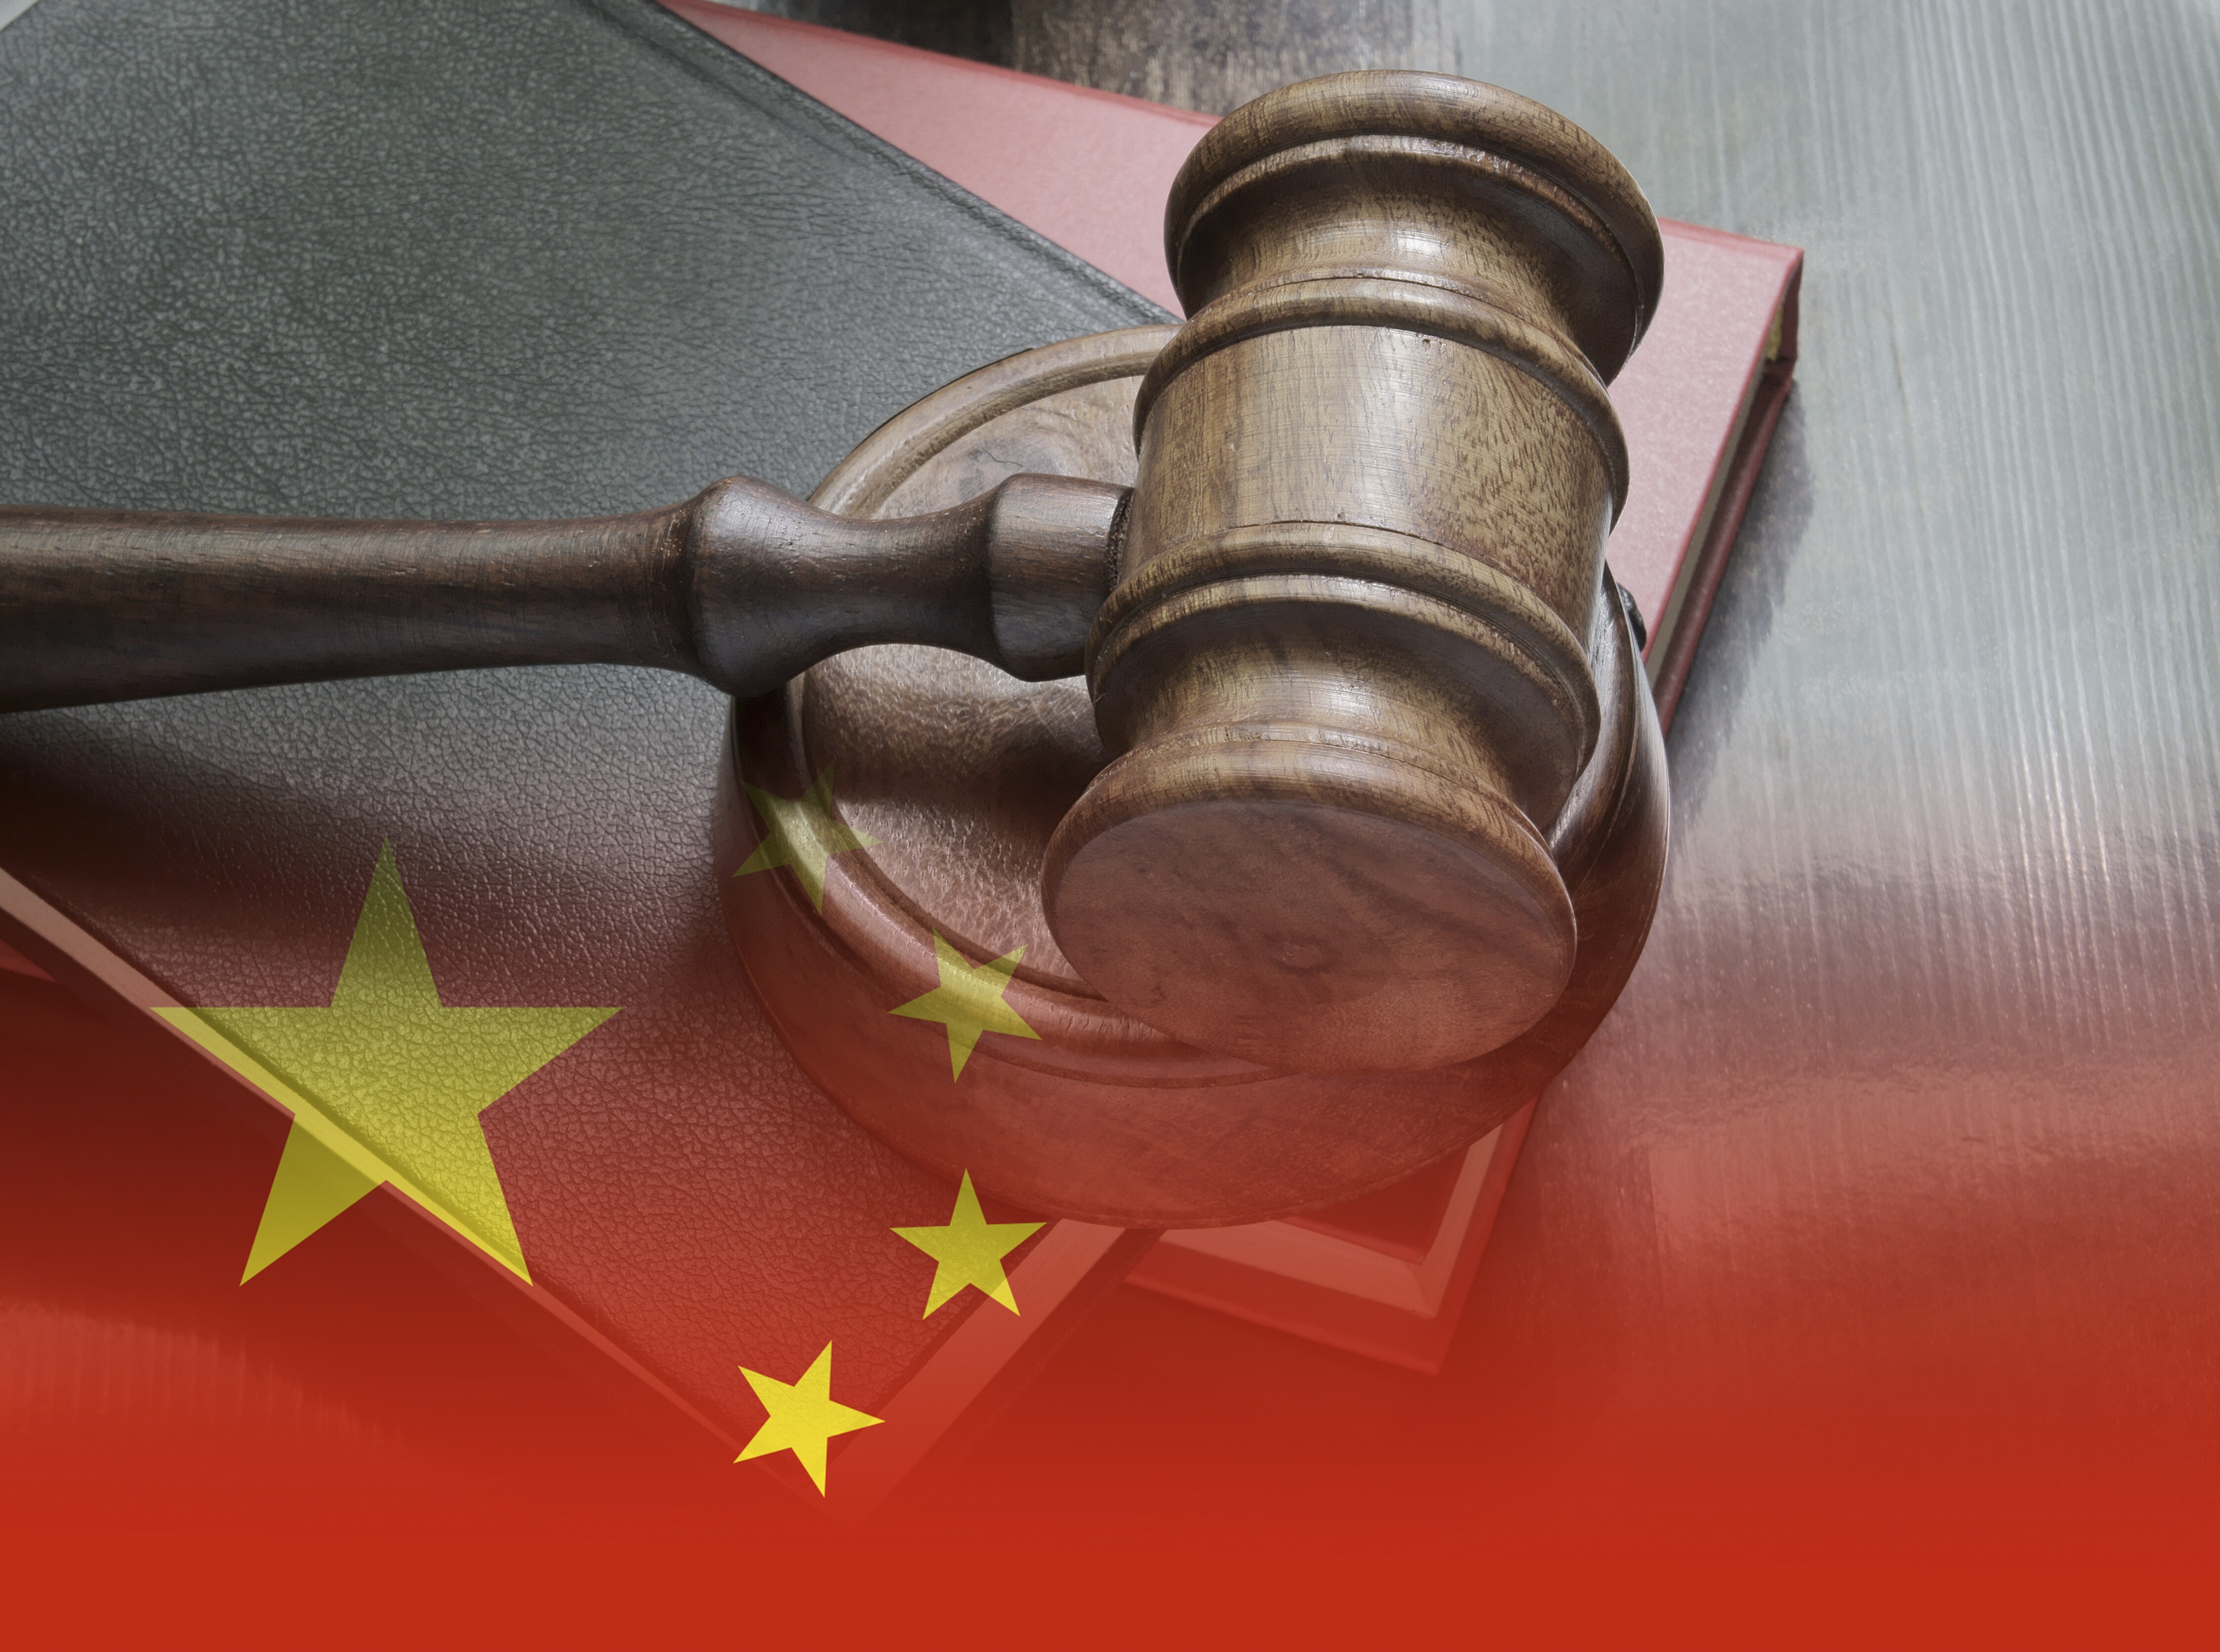 Between February and December last year, more than 7 million legal cases in China were filed online and more than 4 million cases were adjudicated online. Photo: Shutterstock